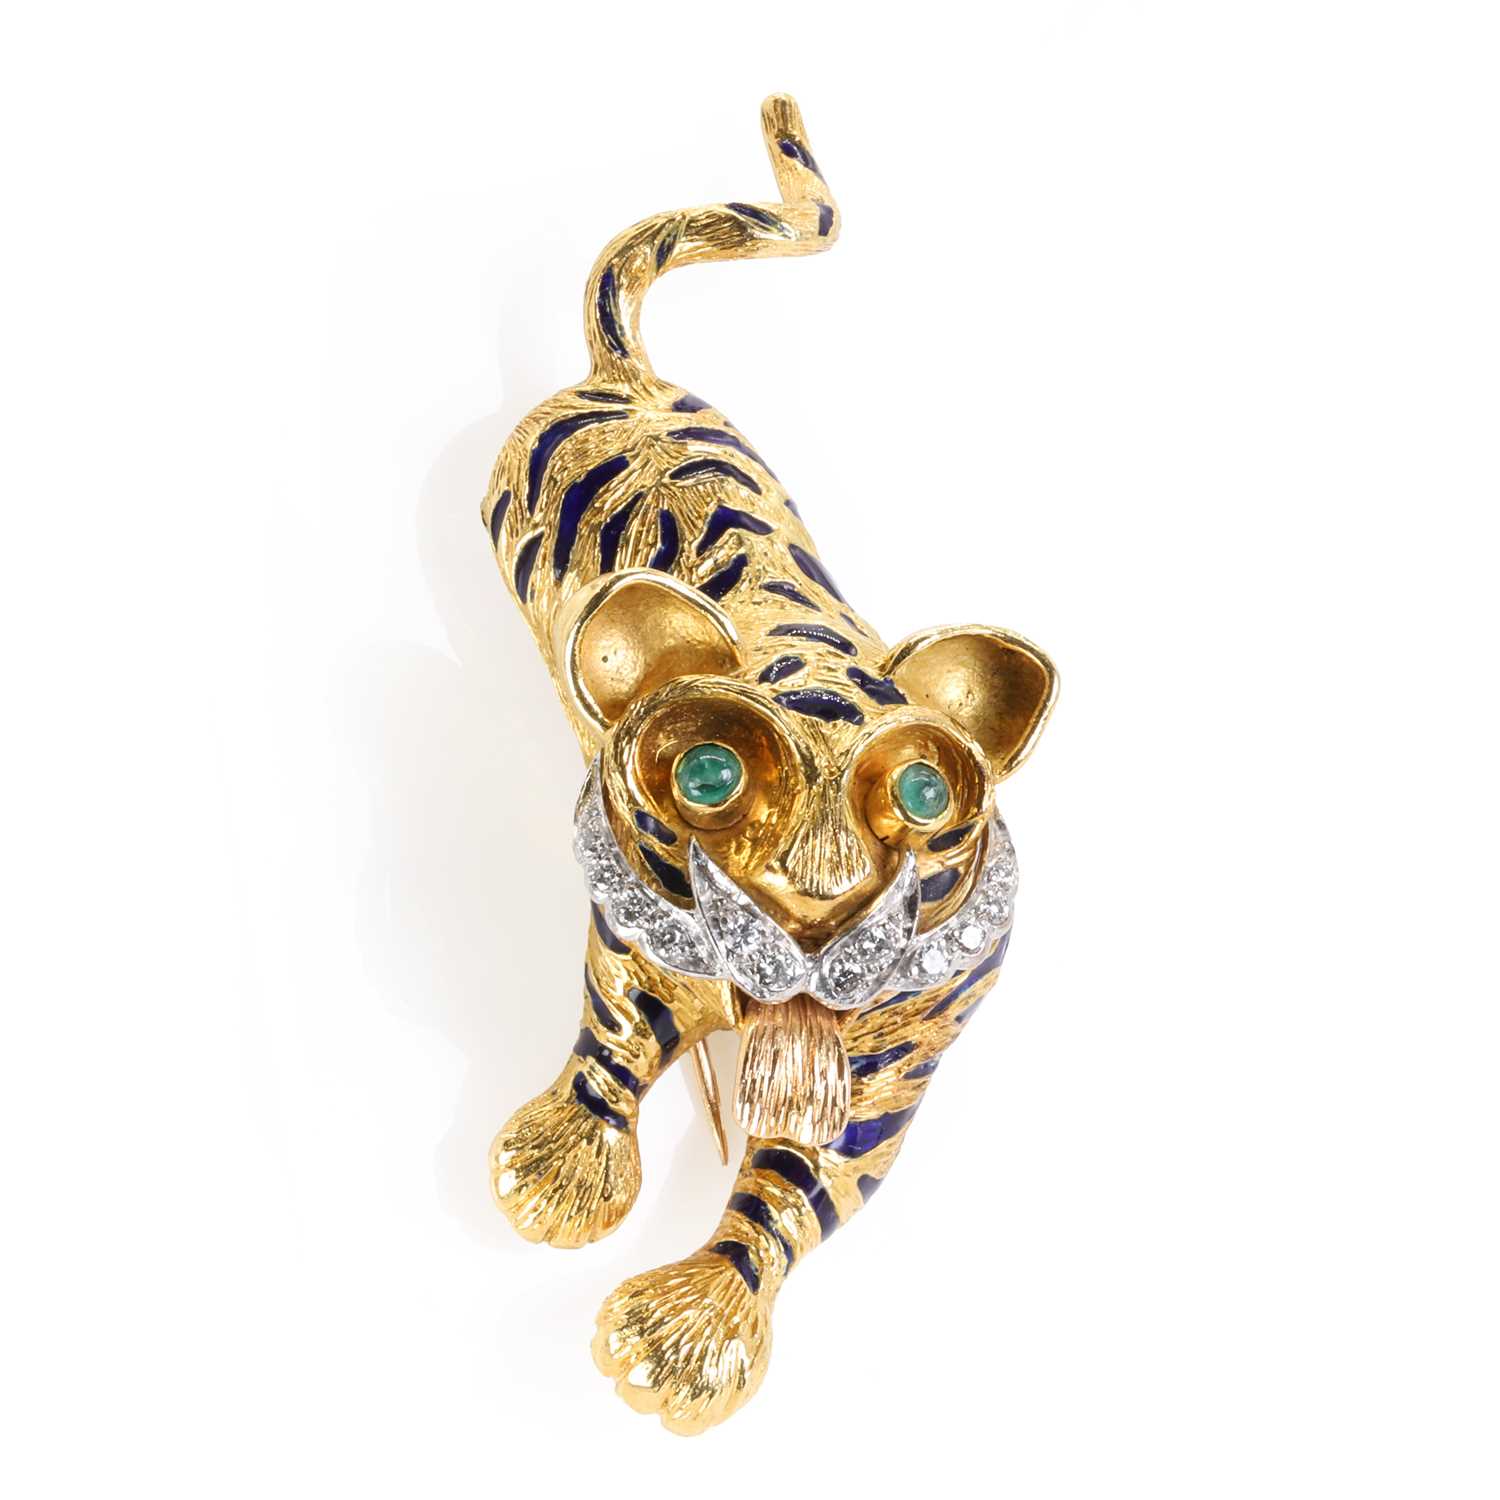 An 18ct gold, enamel and diamond novelty brooch, by Kutchinsky, - Image 2 of 4